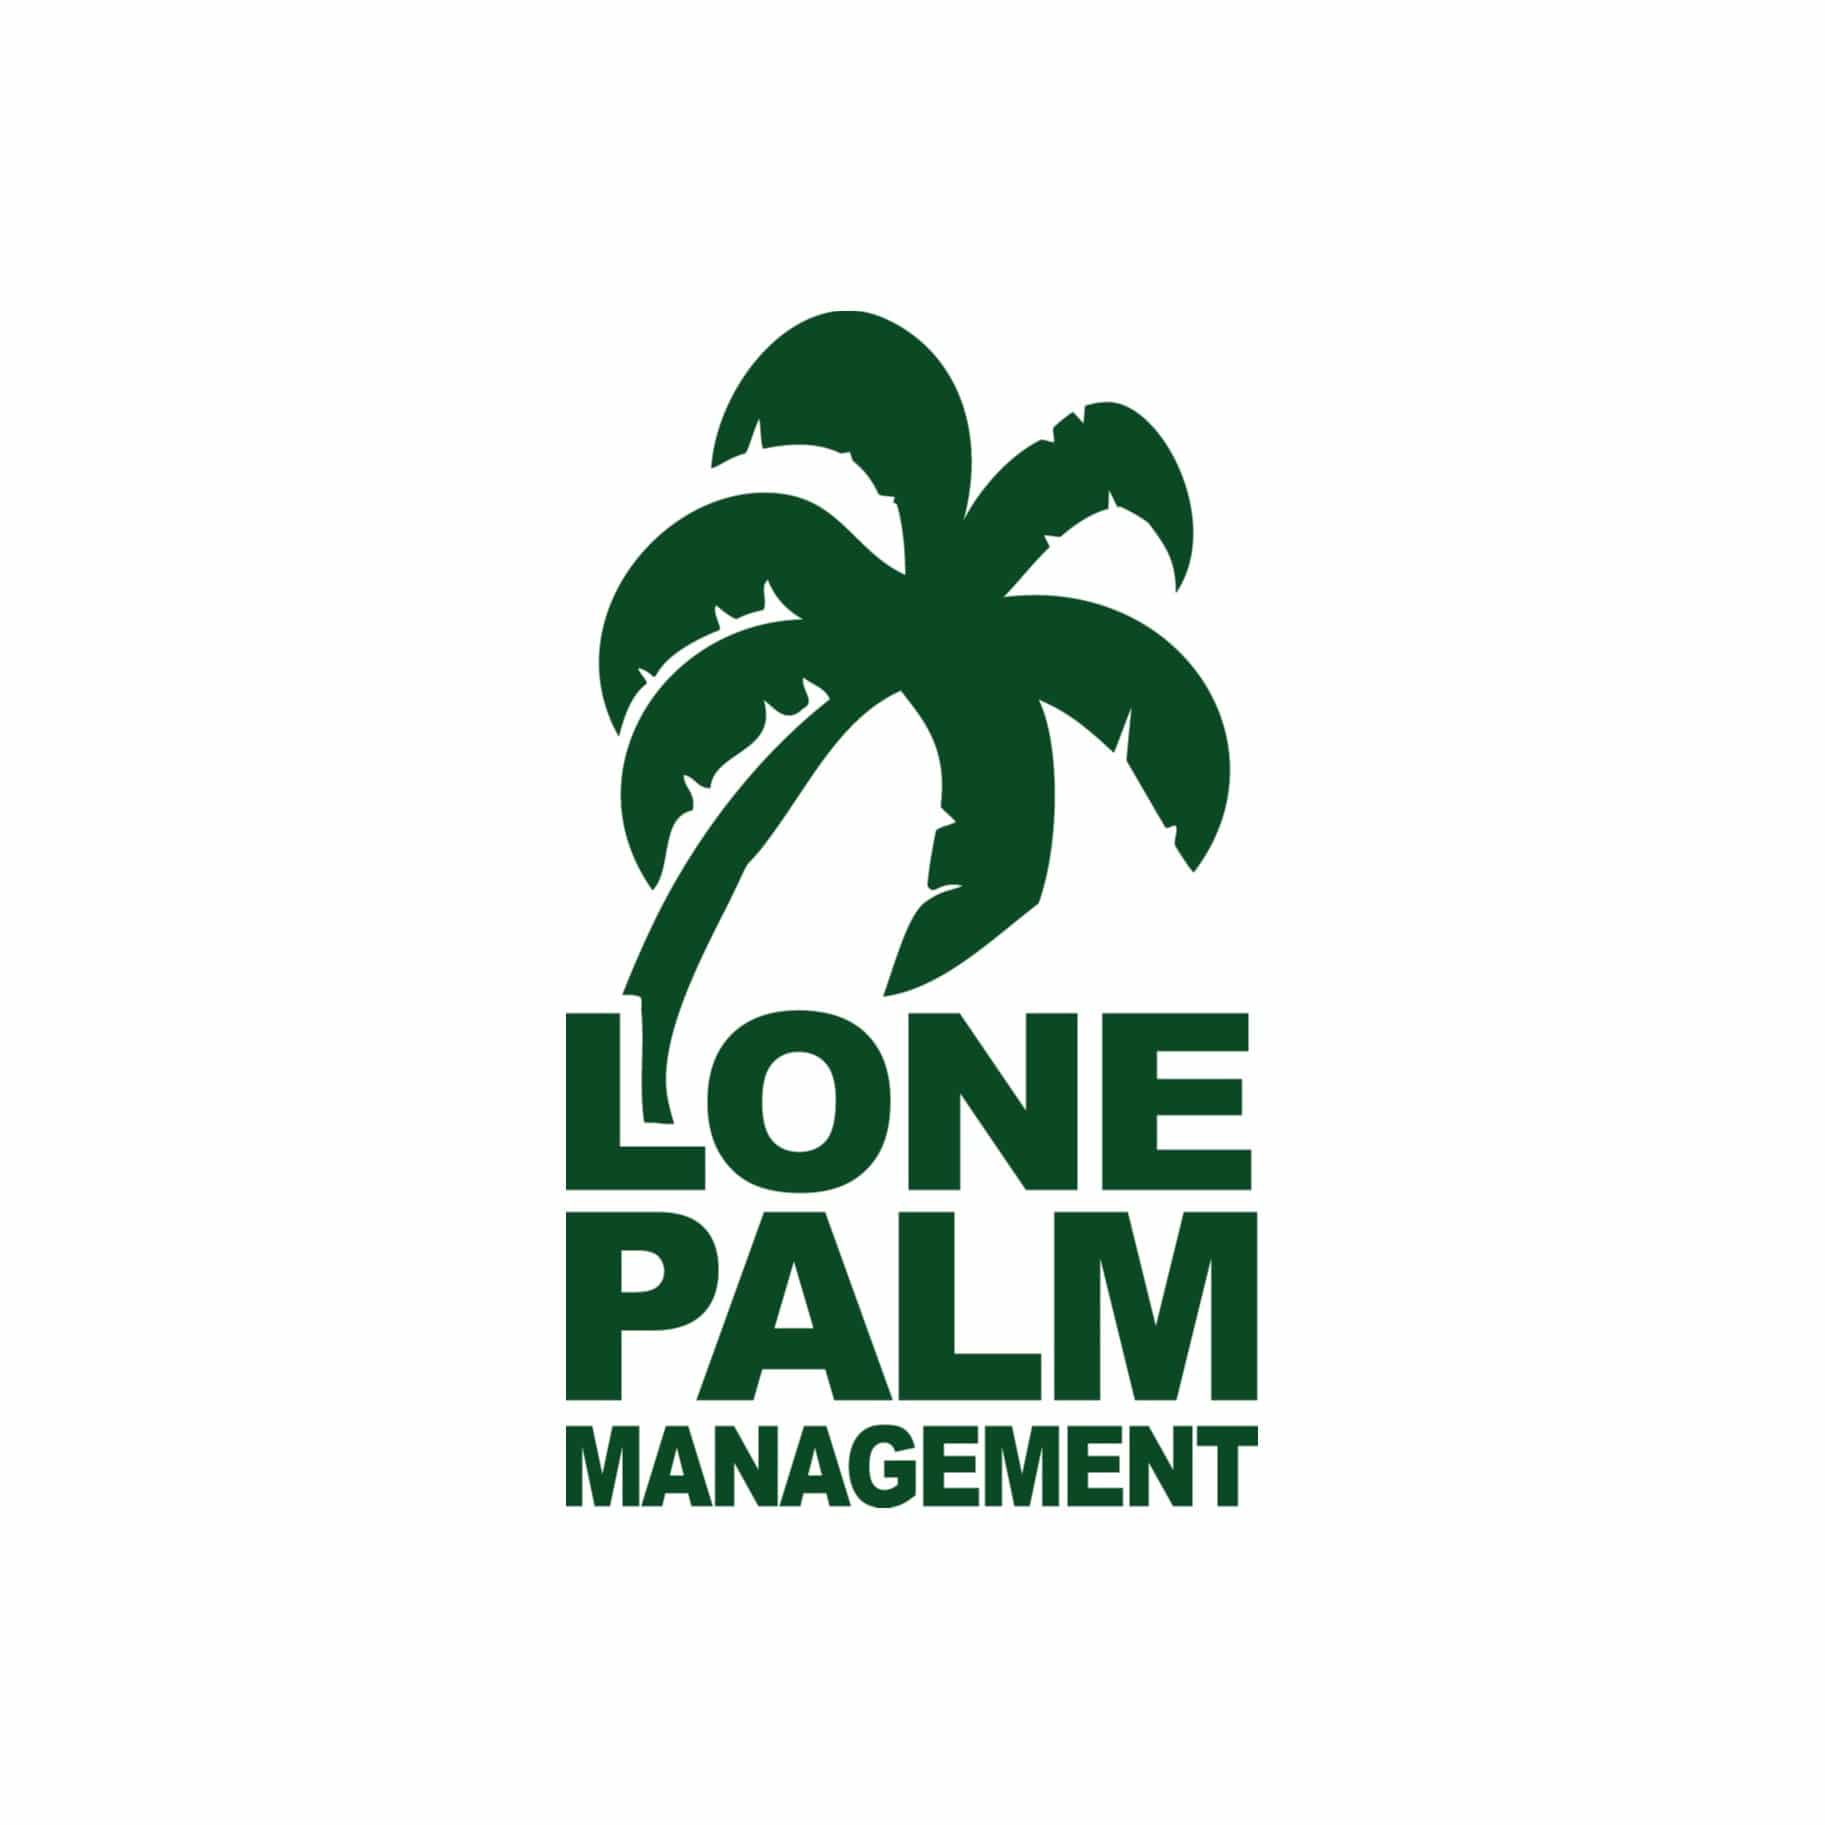 <p><span style="color: rgb(38, 59, 76);" class="ql-size-small">Lone Palm Management</span></p> logo